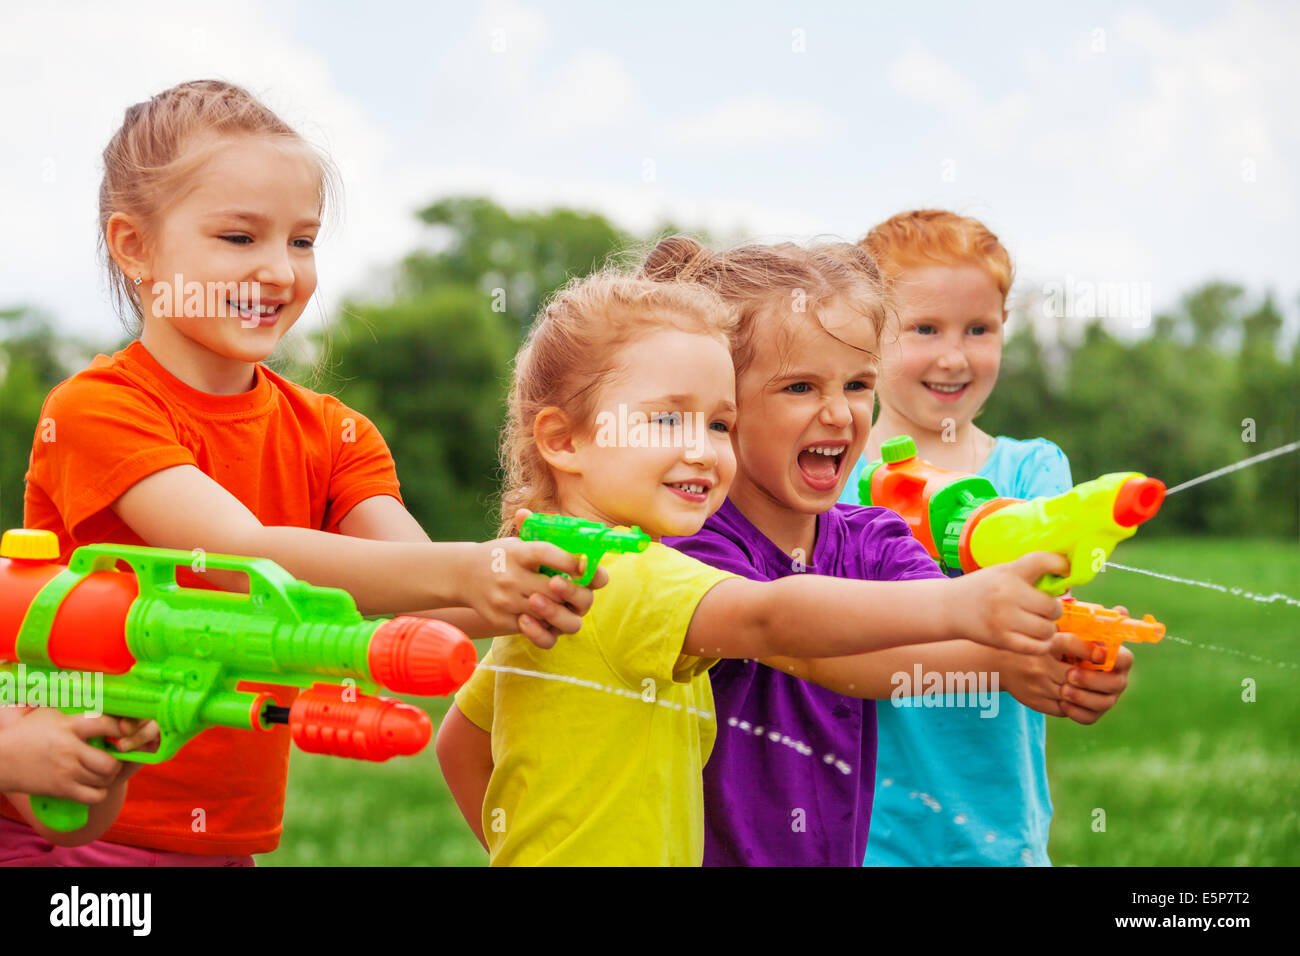 Kids play with water guns on a meadow Stock Photo